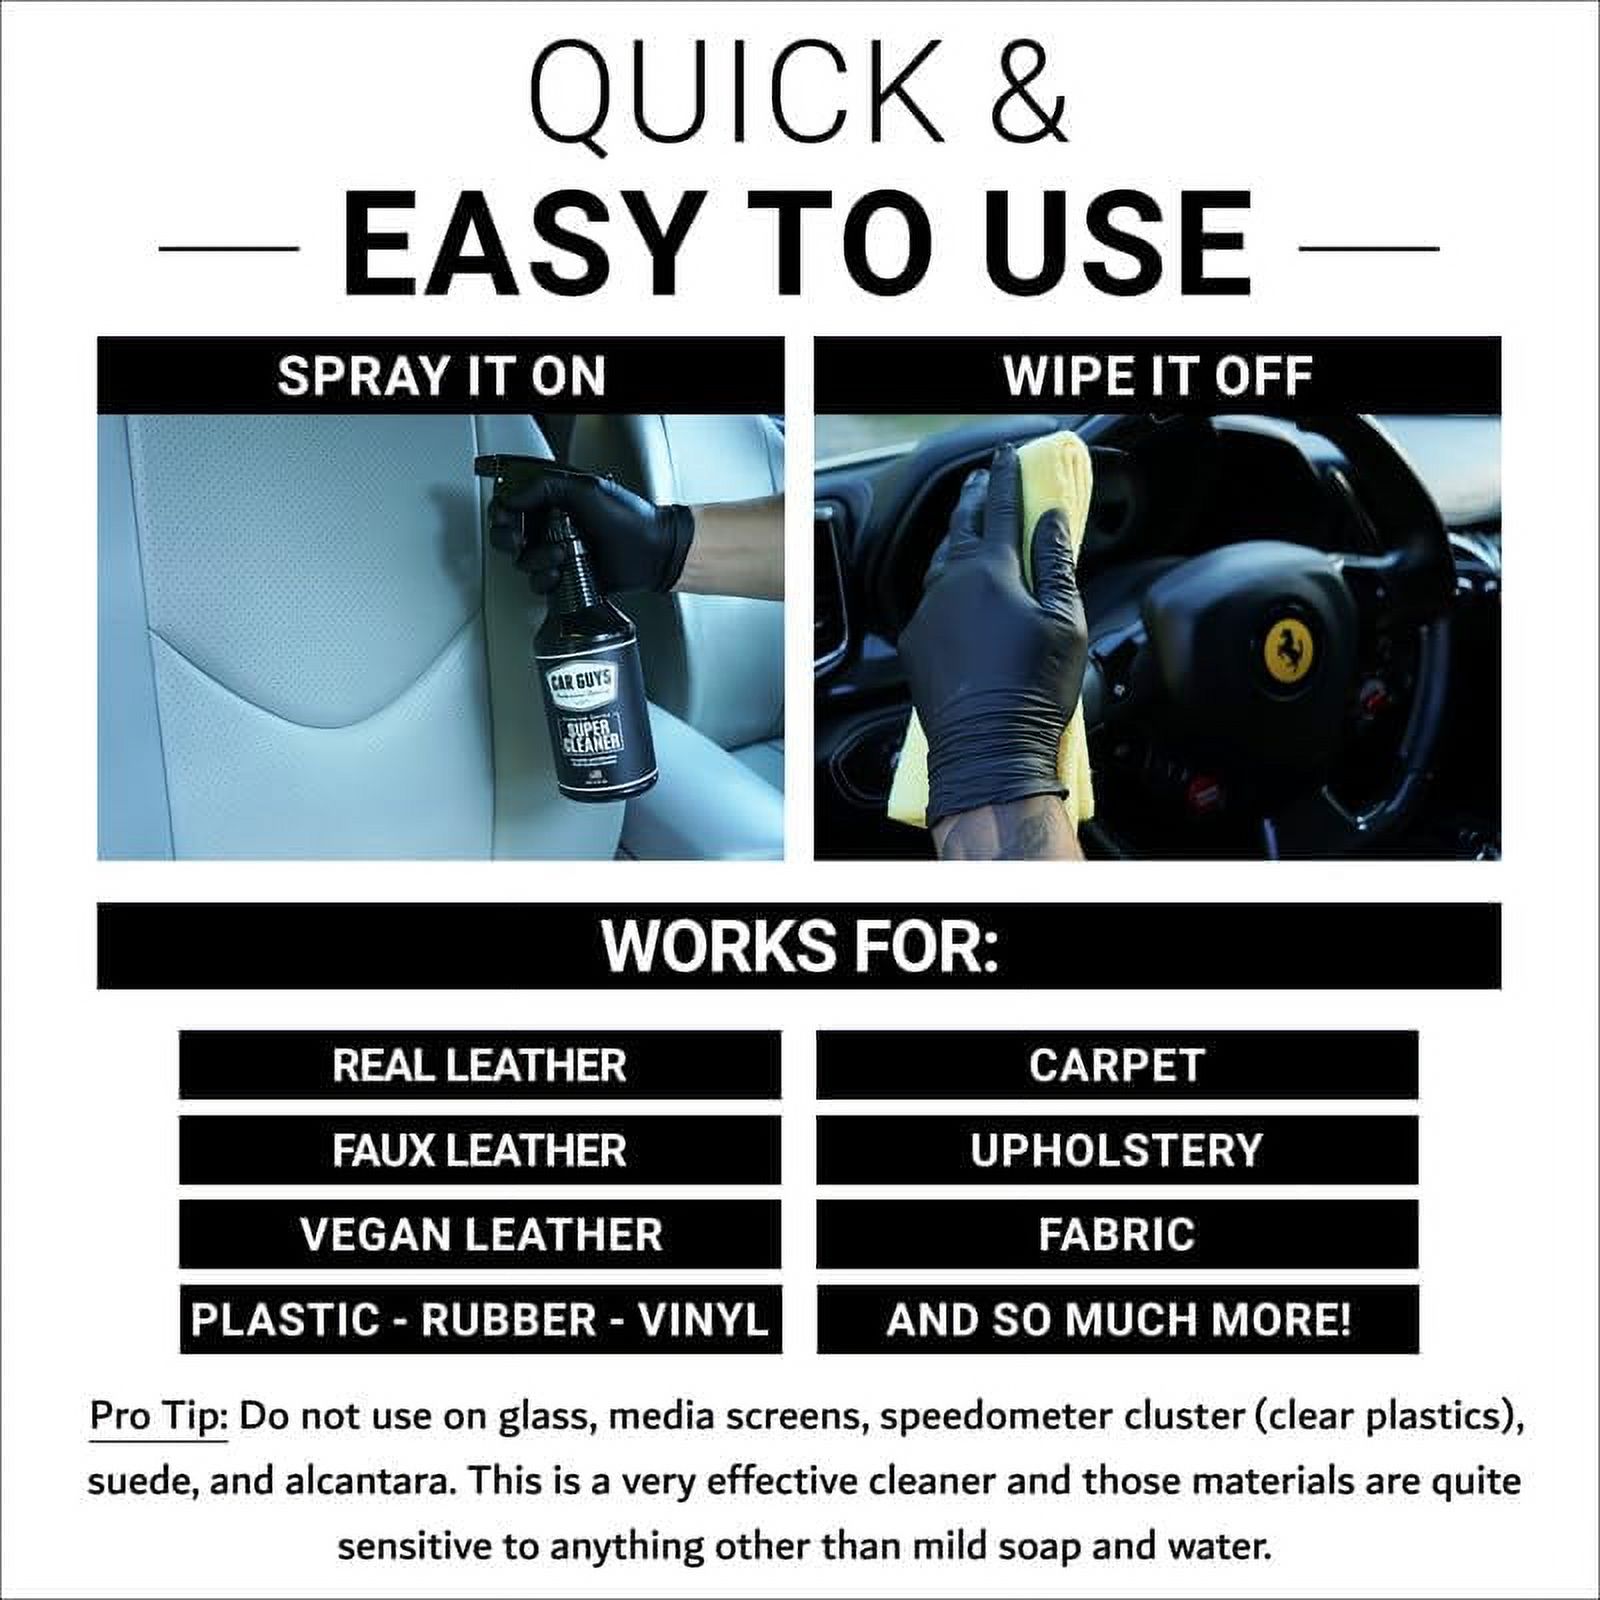 CarGuys Super Cleaner - Effective All Purpose Cleaner - Best for Leather Vinyl Carpet Upholstery Plastic Rubber and Much More! - 18 oz Kit - image 3 of 5